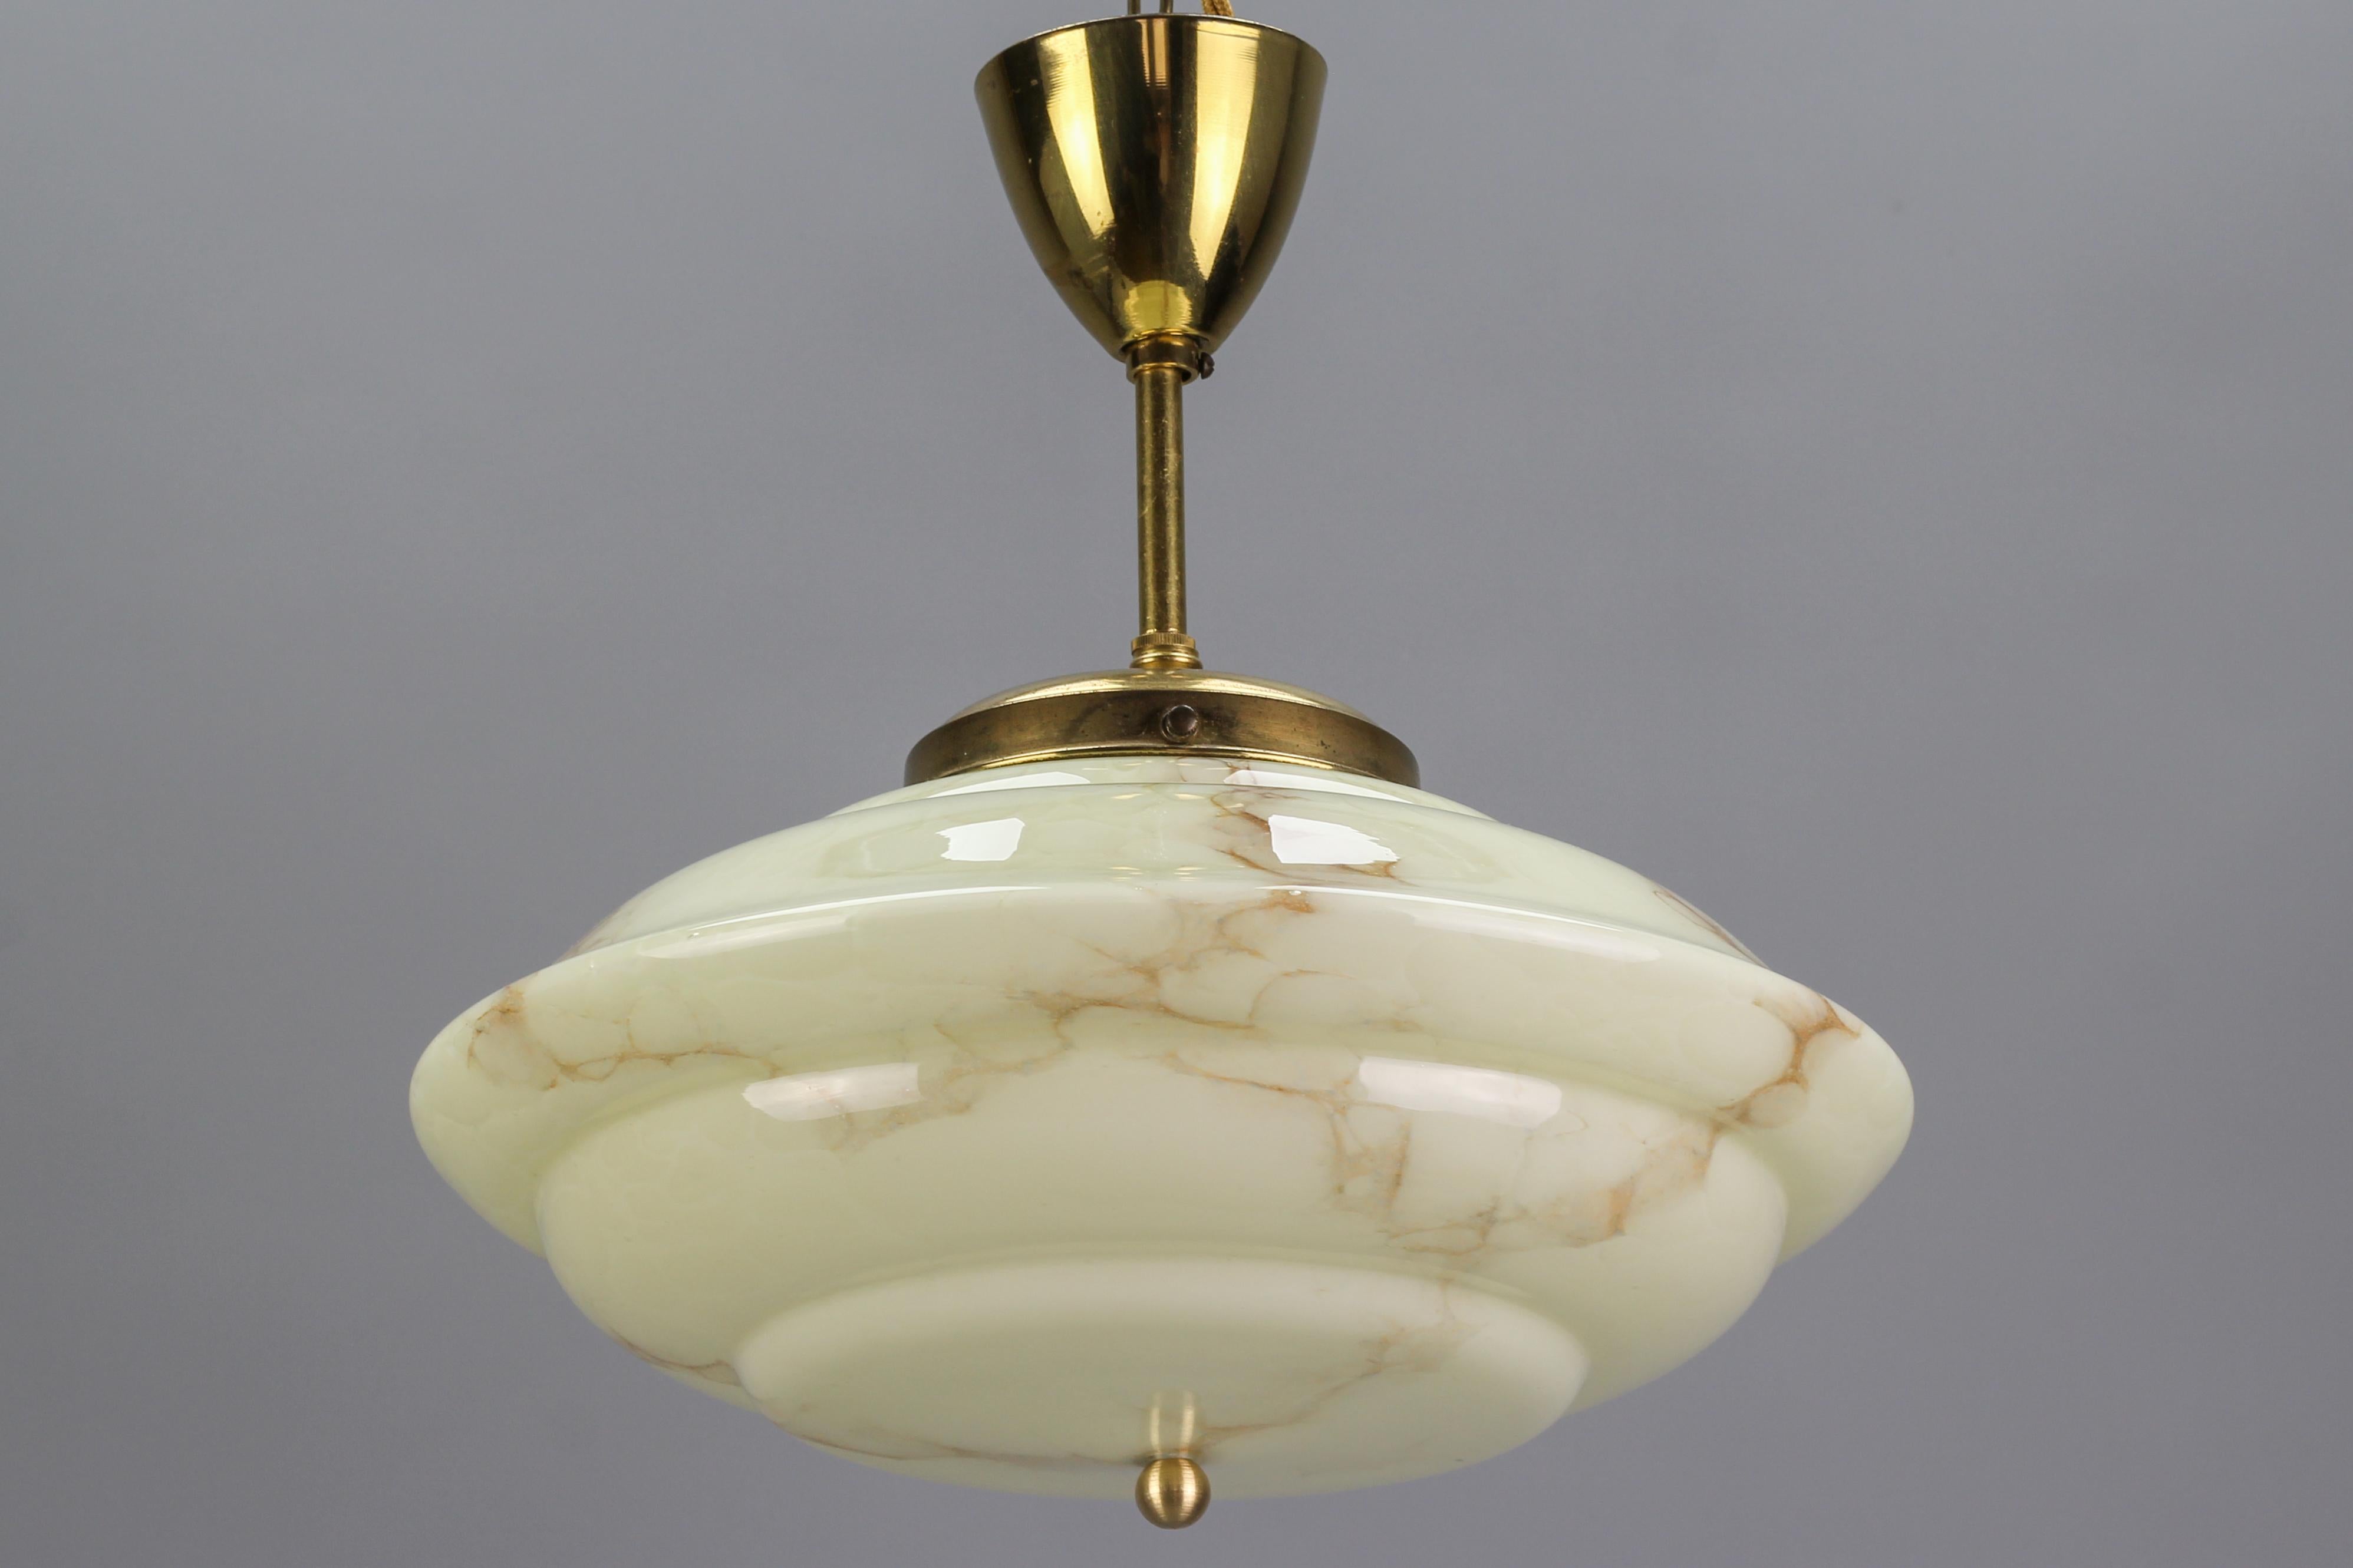 Adorable Art Deco cream and vanilla - beige-colored marbled/veined glass pendant ceiling lamp. Ufo-shaped glass lampshade; brass rod and canopy. 
The lamp fits in a 1930s style interior as well as a modern interior, especially suitable for a lower